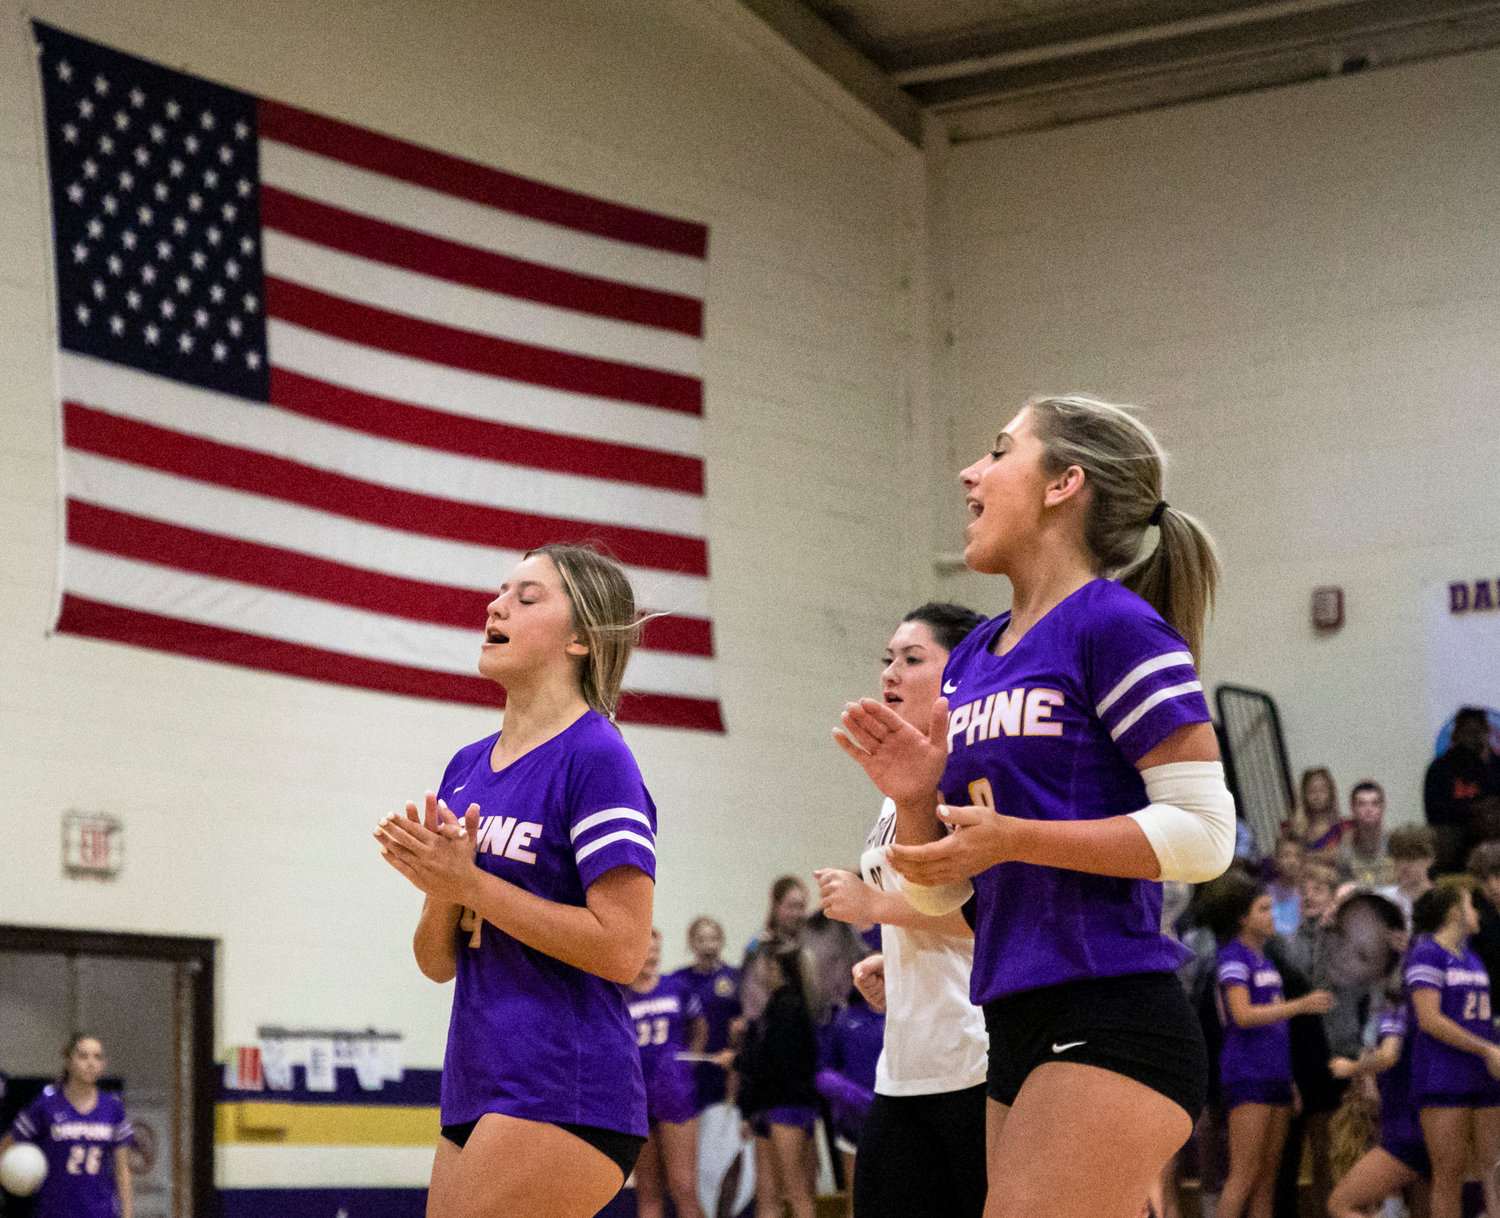 The Daphne Trojans run off the court for a timeout during the area match against the McGill-Toolen Yellow Jackets at Daphne High School Sept. 20. The Trojans checked in at No. 37 in MaxPreps’ state rankings updated Monday with the regular season winding down.